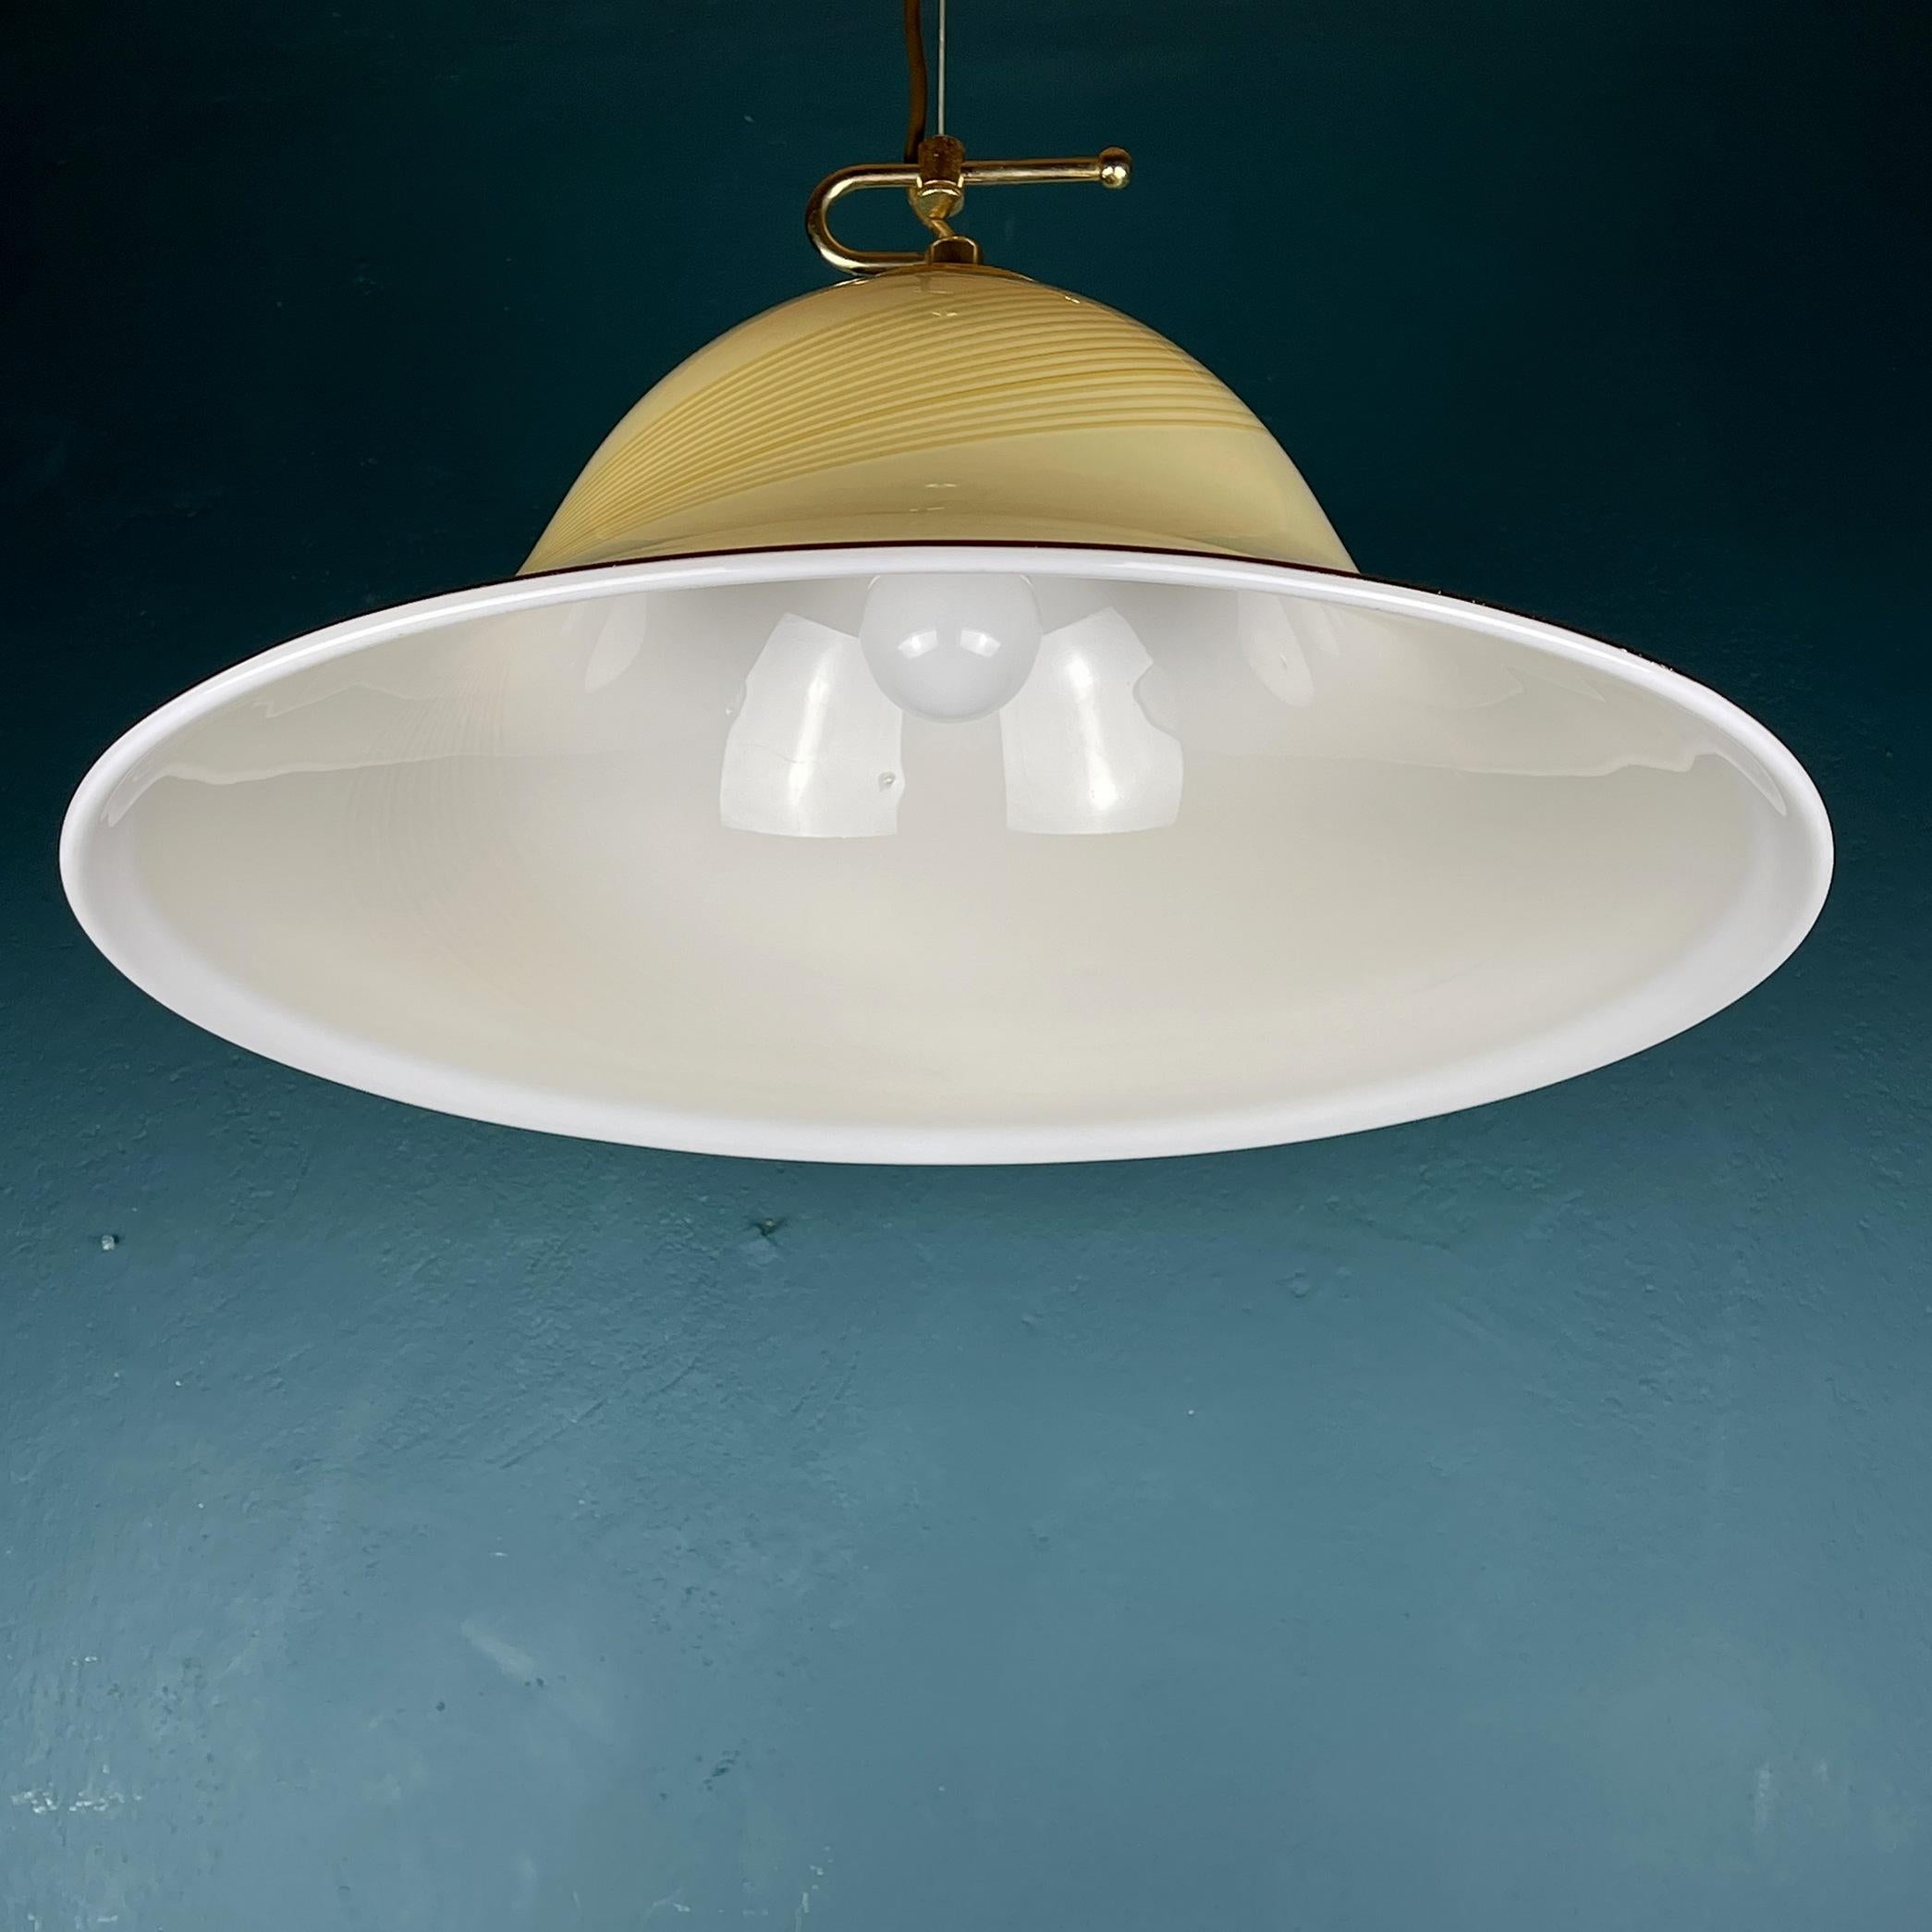 20th Century Vintage Beige Murano Glass Pendant Lamp by De Majo, Italy, 1970s For Sale